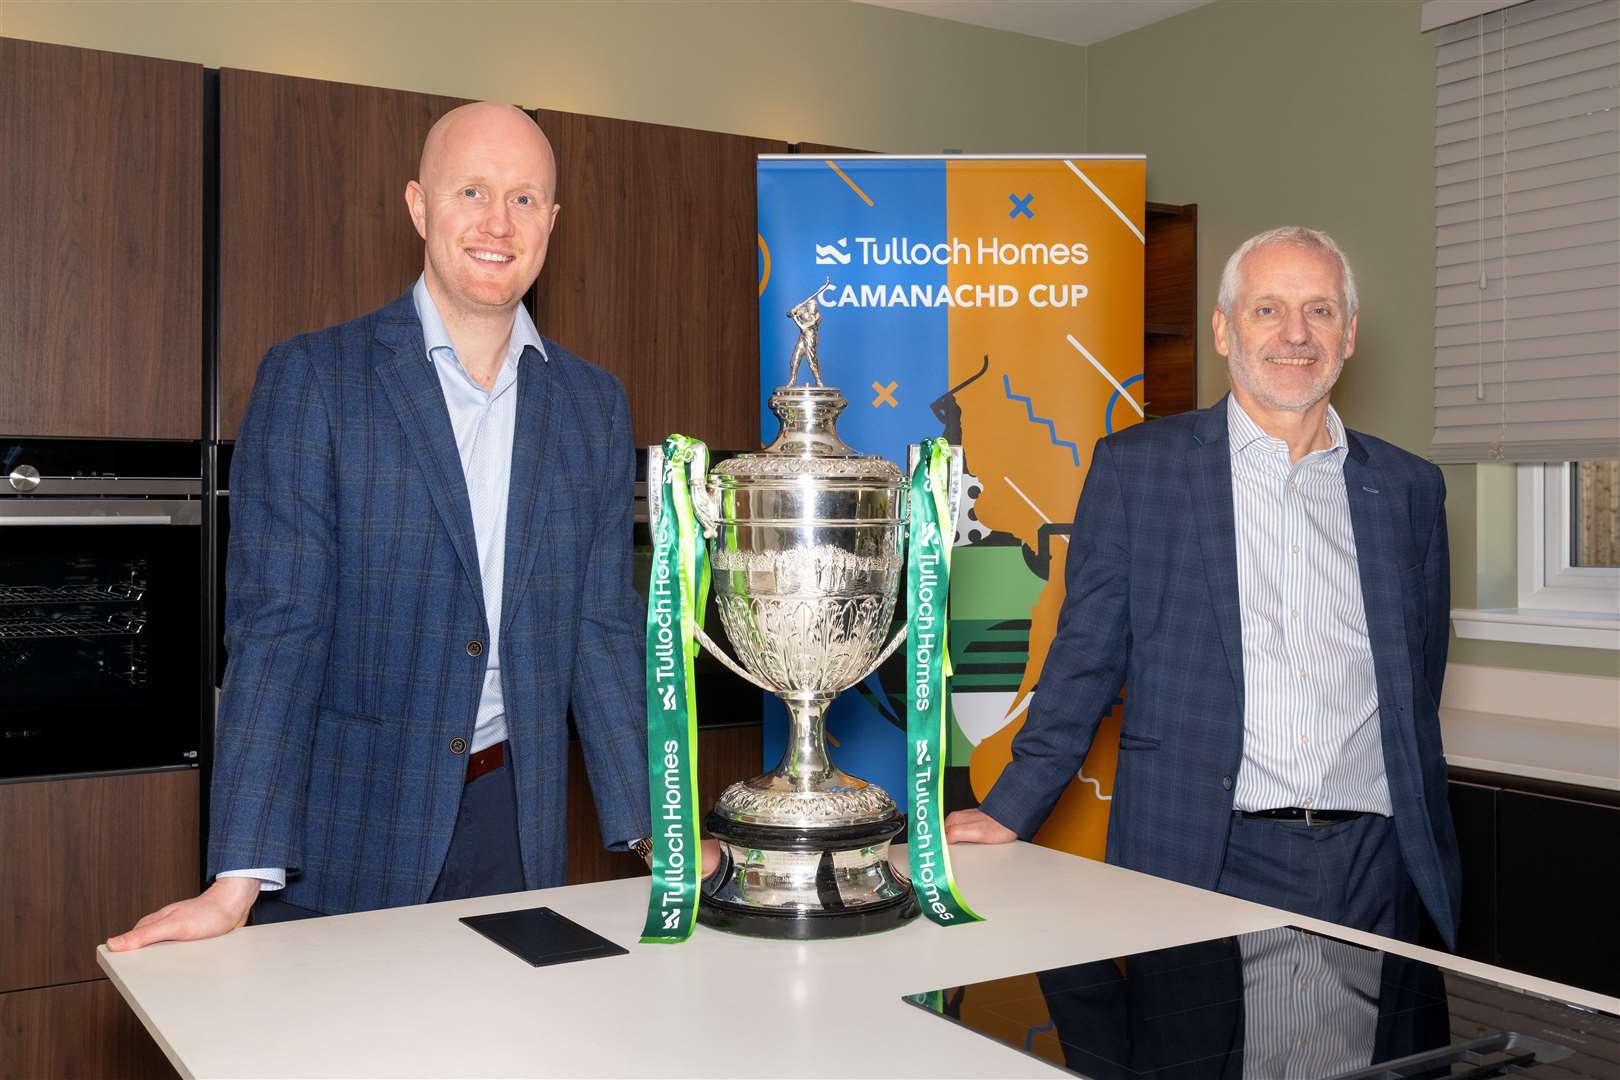 Kieran Graham, Tulloch Commercial Director and Sandy Grant, Tulloch Homes Managing Director with the Tulloch Homes Camanachd Cup.